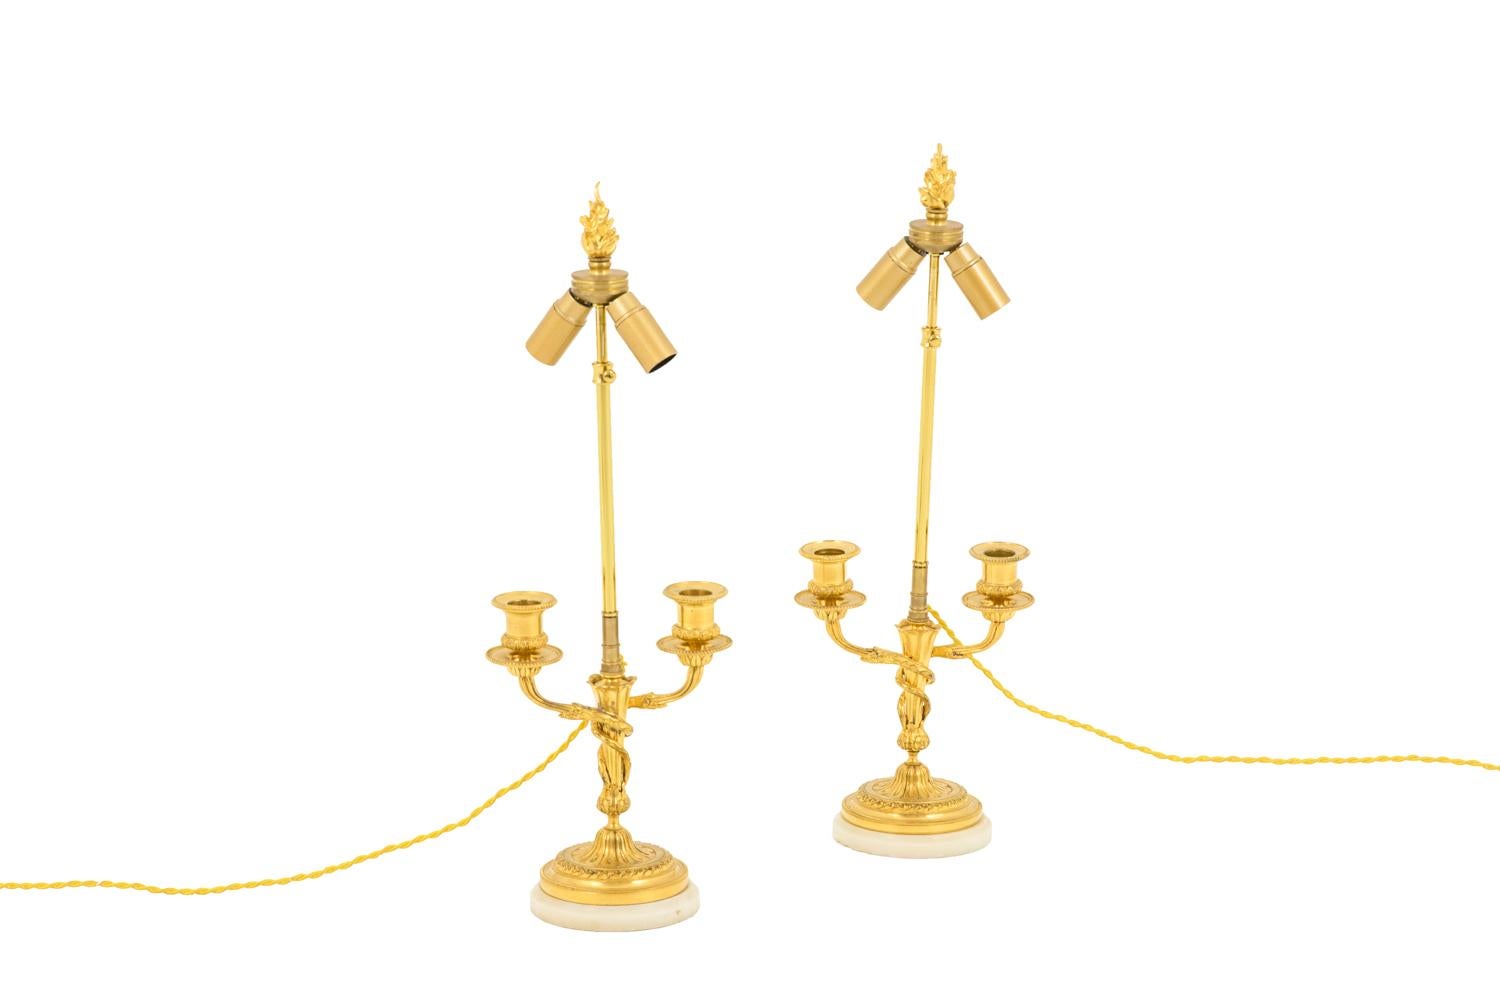 Pair of Louis XVI style lamps in gilt bronze with two acanthus leaves shaped fires wrapped around the shaft. Two arm lights with bobeches decorated with a beads frieze and grapes and cups adorned with a beads frieze and water leaves. Flared shaped